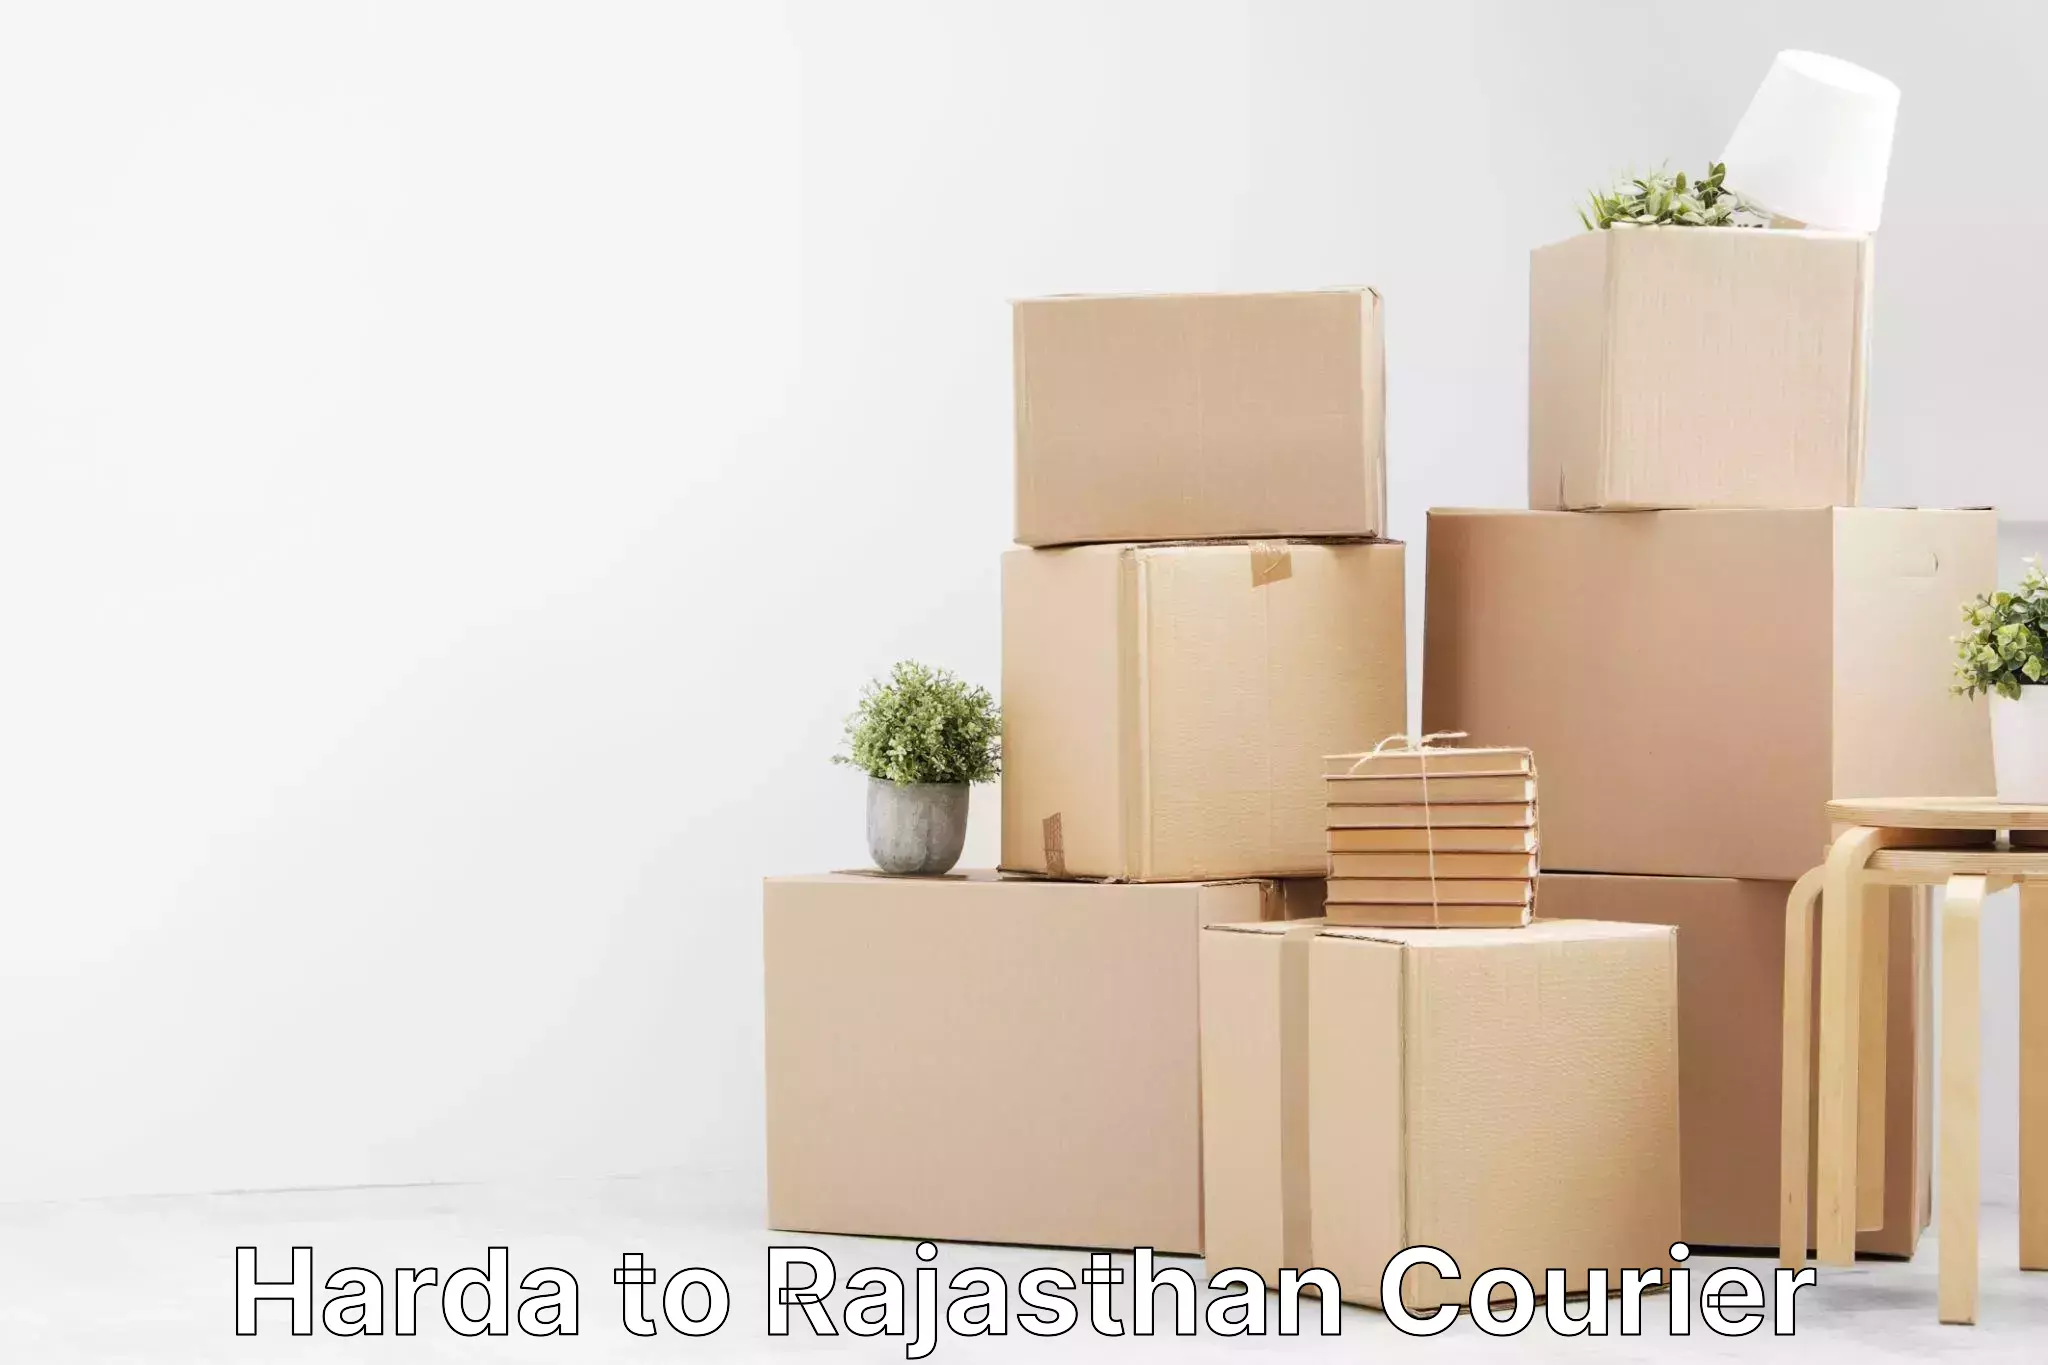 Professional parcel services Harda to Rajasthan